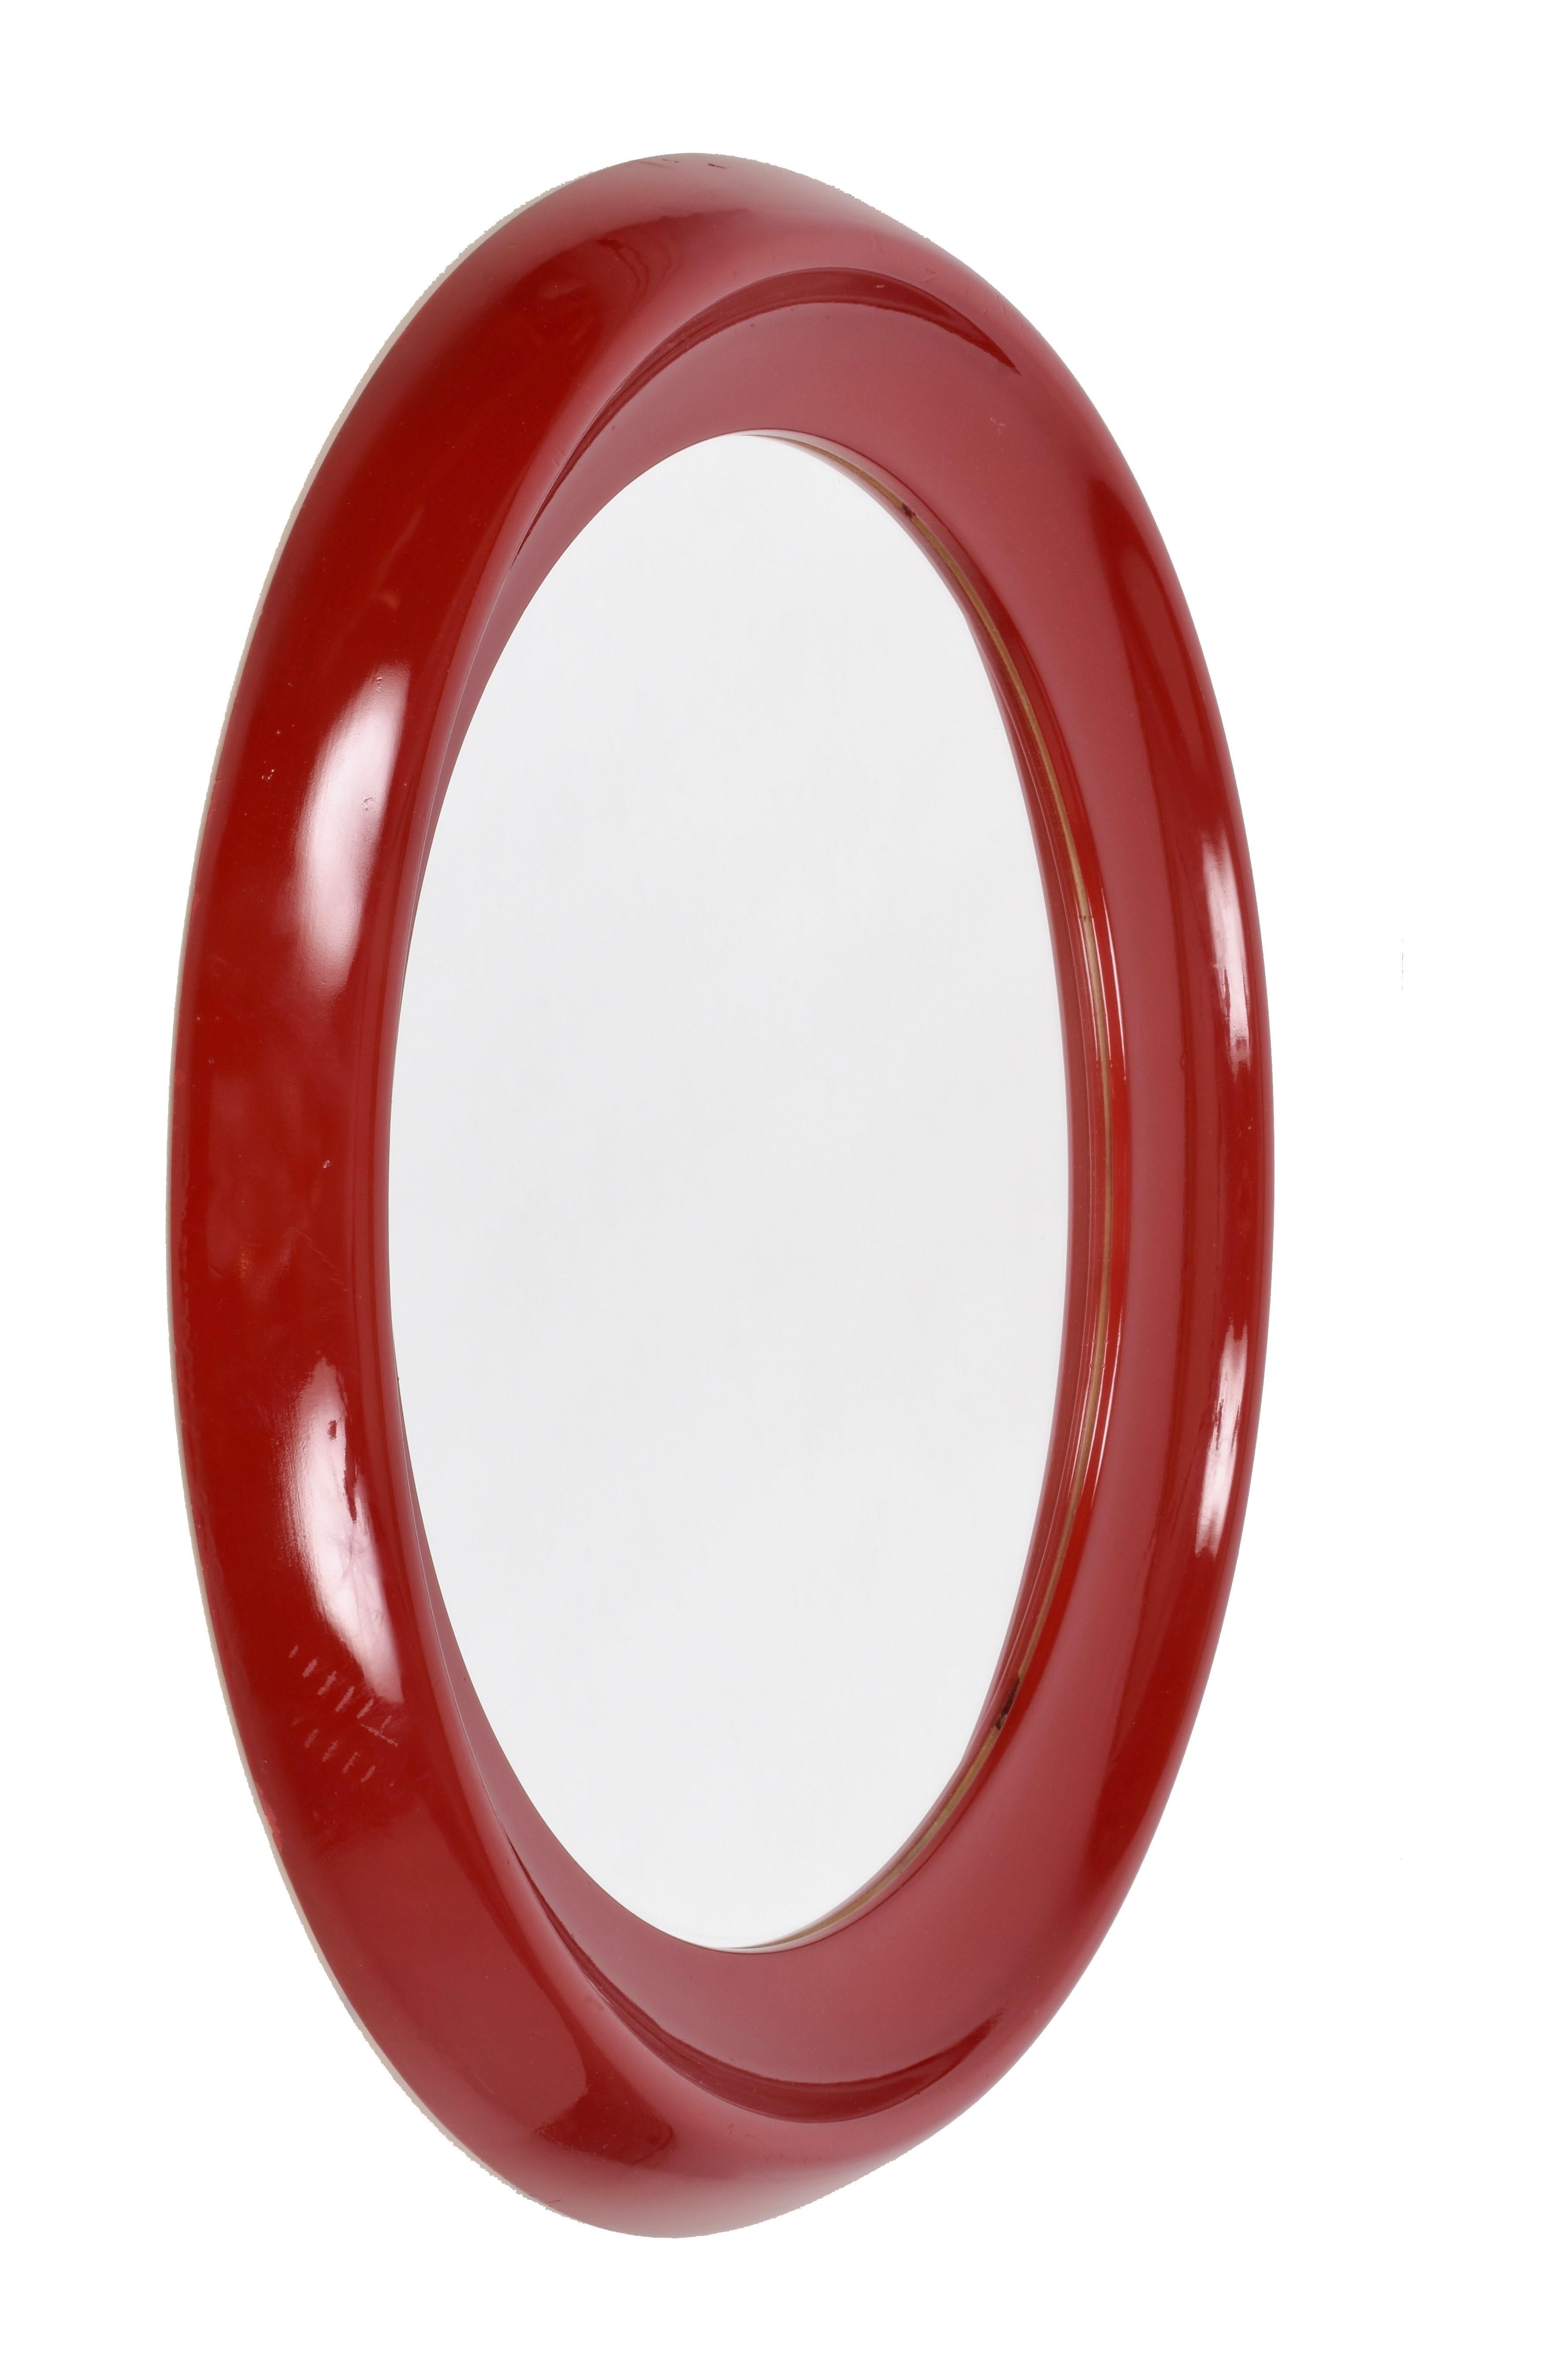 Amazing round mirror with red lacquered resin frame. This piece was produced in Italy during 1970s.

This mirror will surprise you with its round lines and its glossy and eye-catching red-lacquered resin frame.

An iconic item from the 1970s